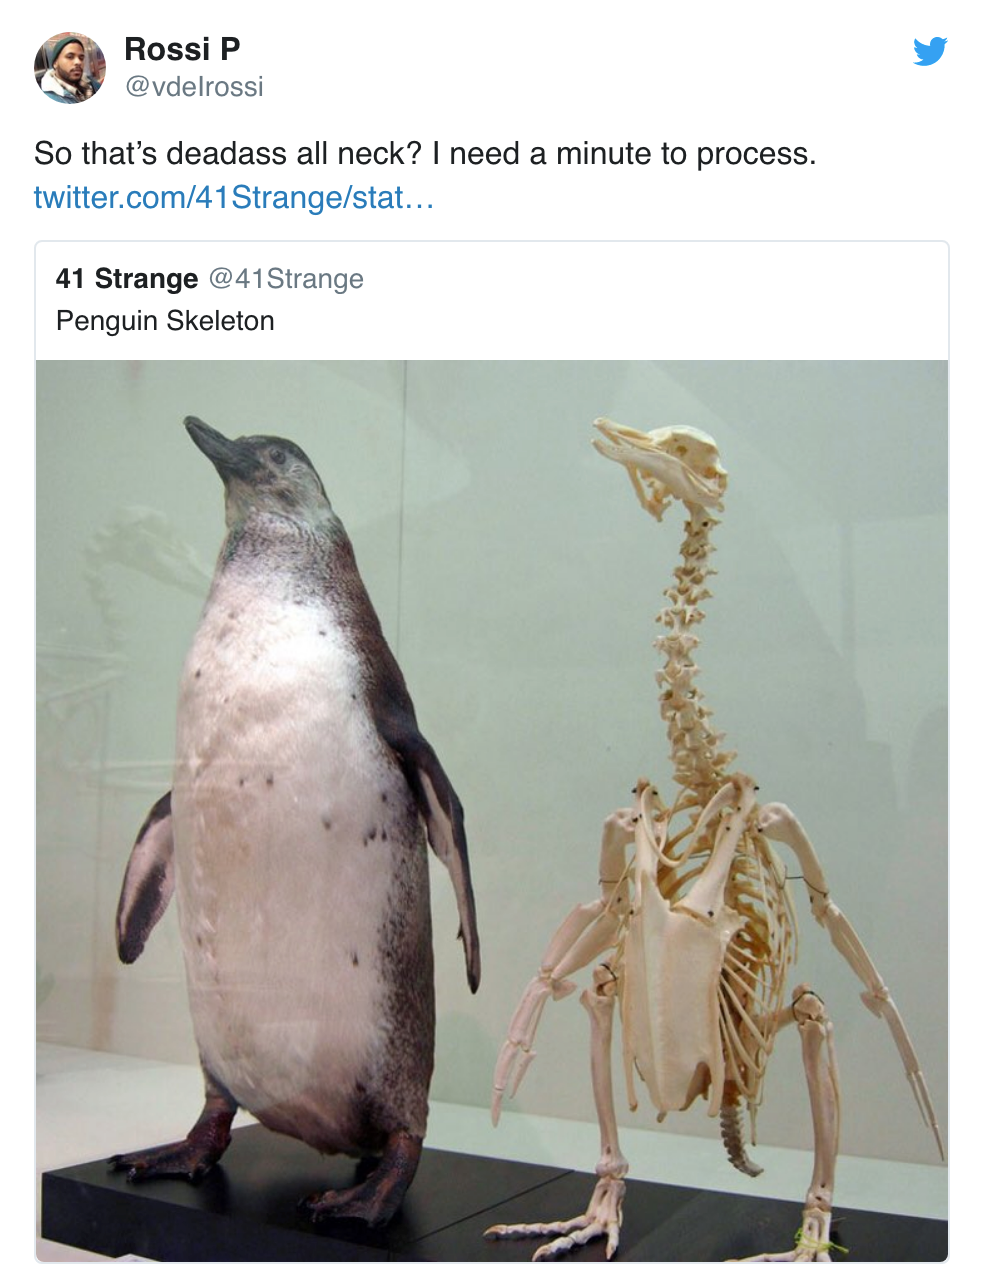 penguin skeleton - A Rossi P So that's deadass all neck? I need a minute to process. twitter.com41Strangestat... 41 Strange Penguin Skeleton